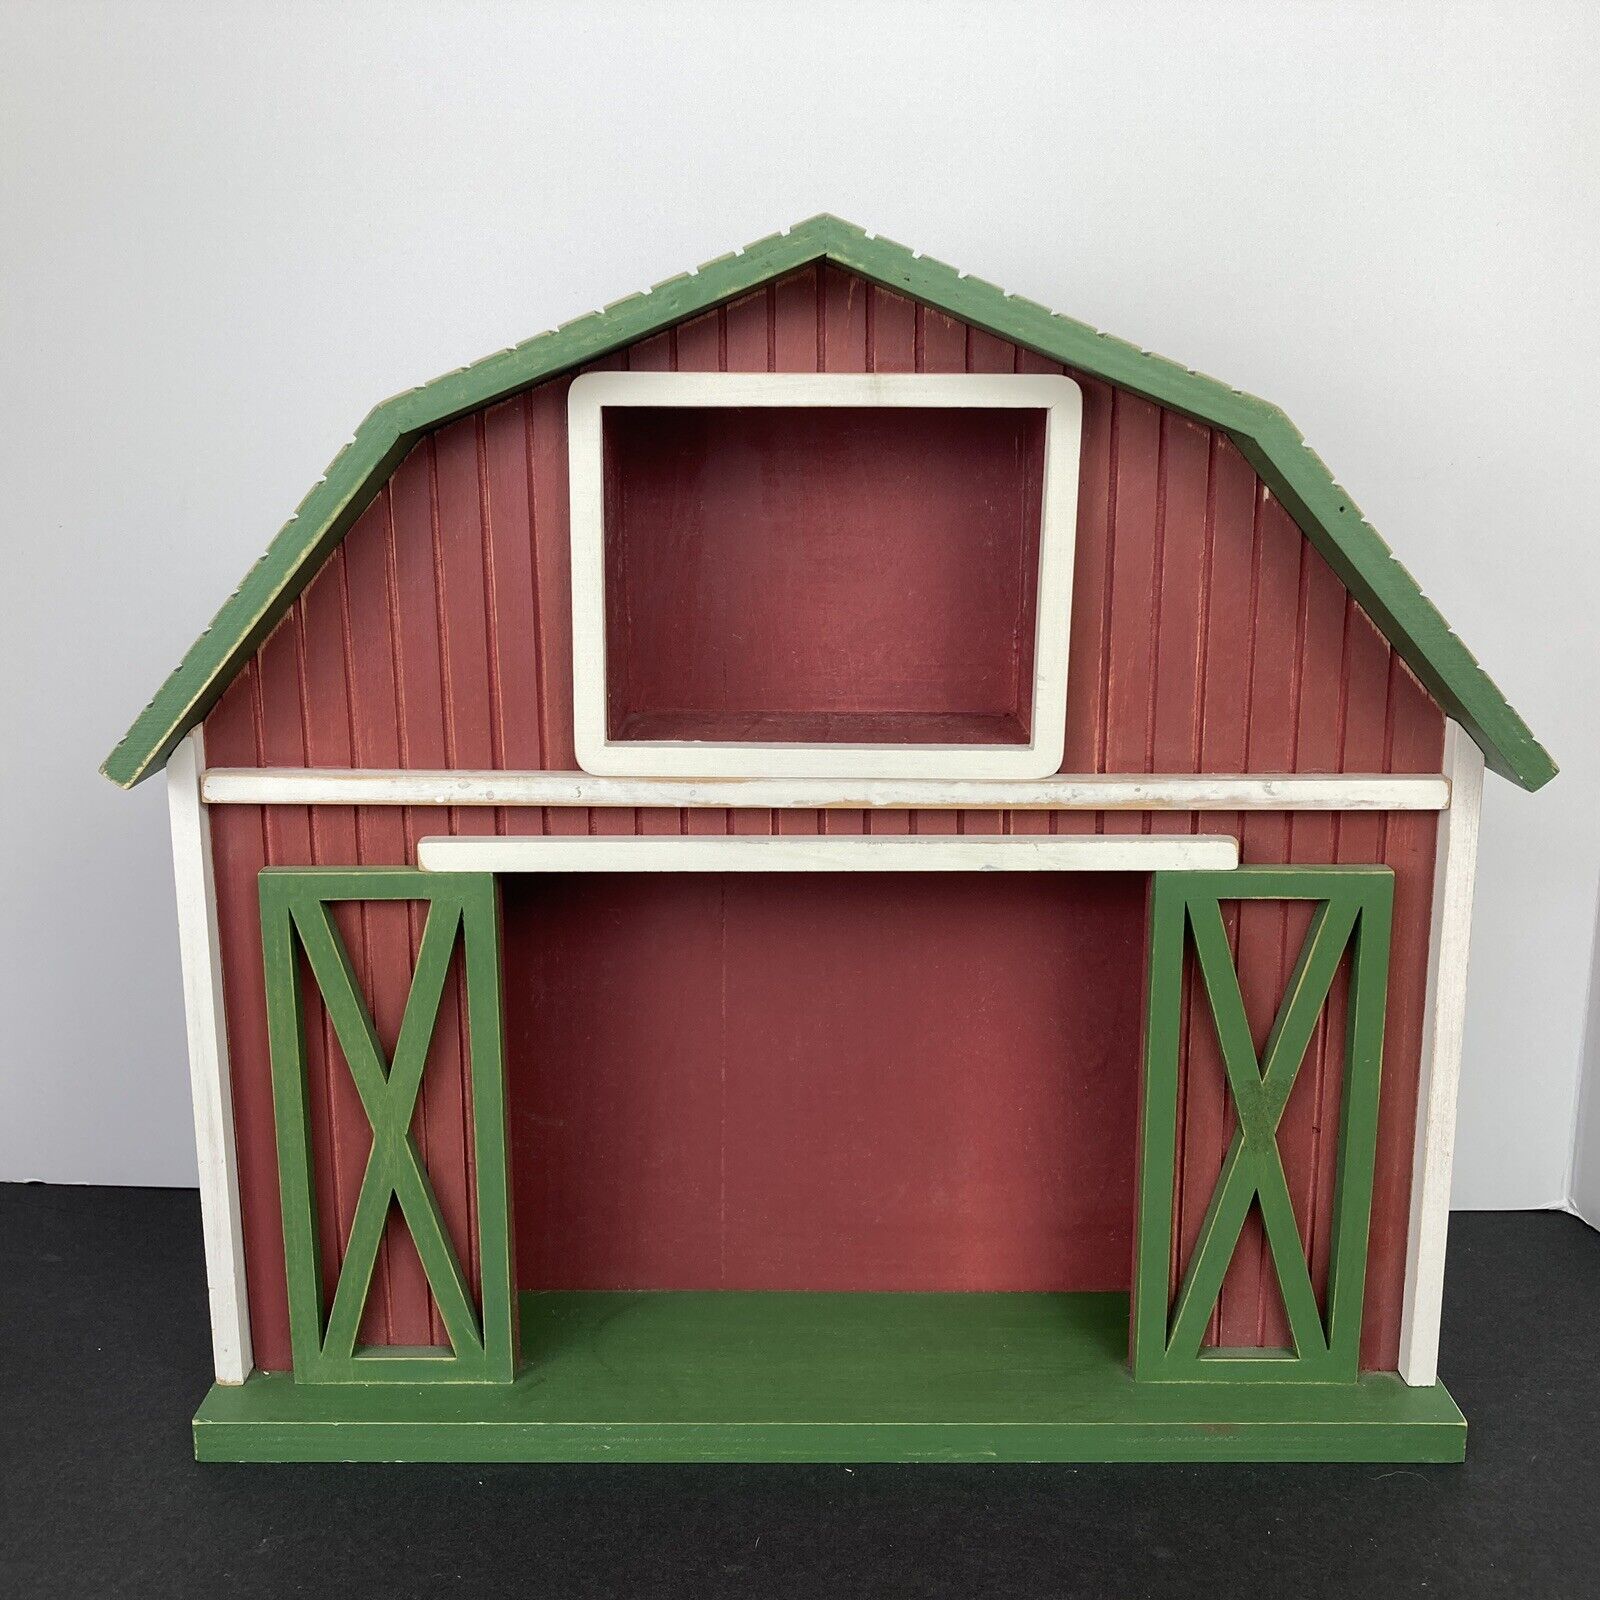 Enesco Vintage Large Barn Display Large about 14 X 14 red green farm country